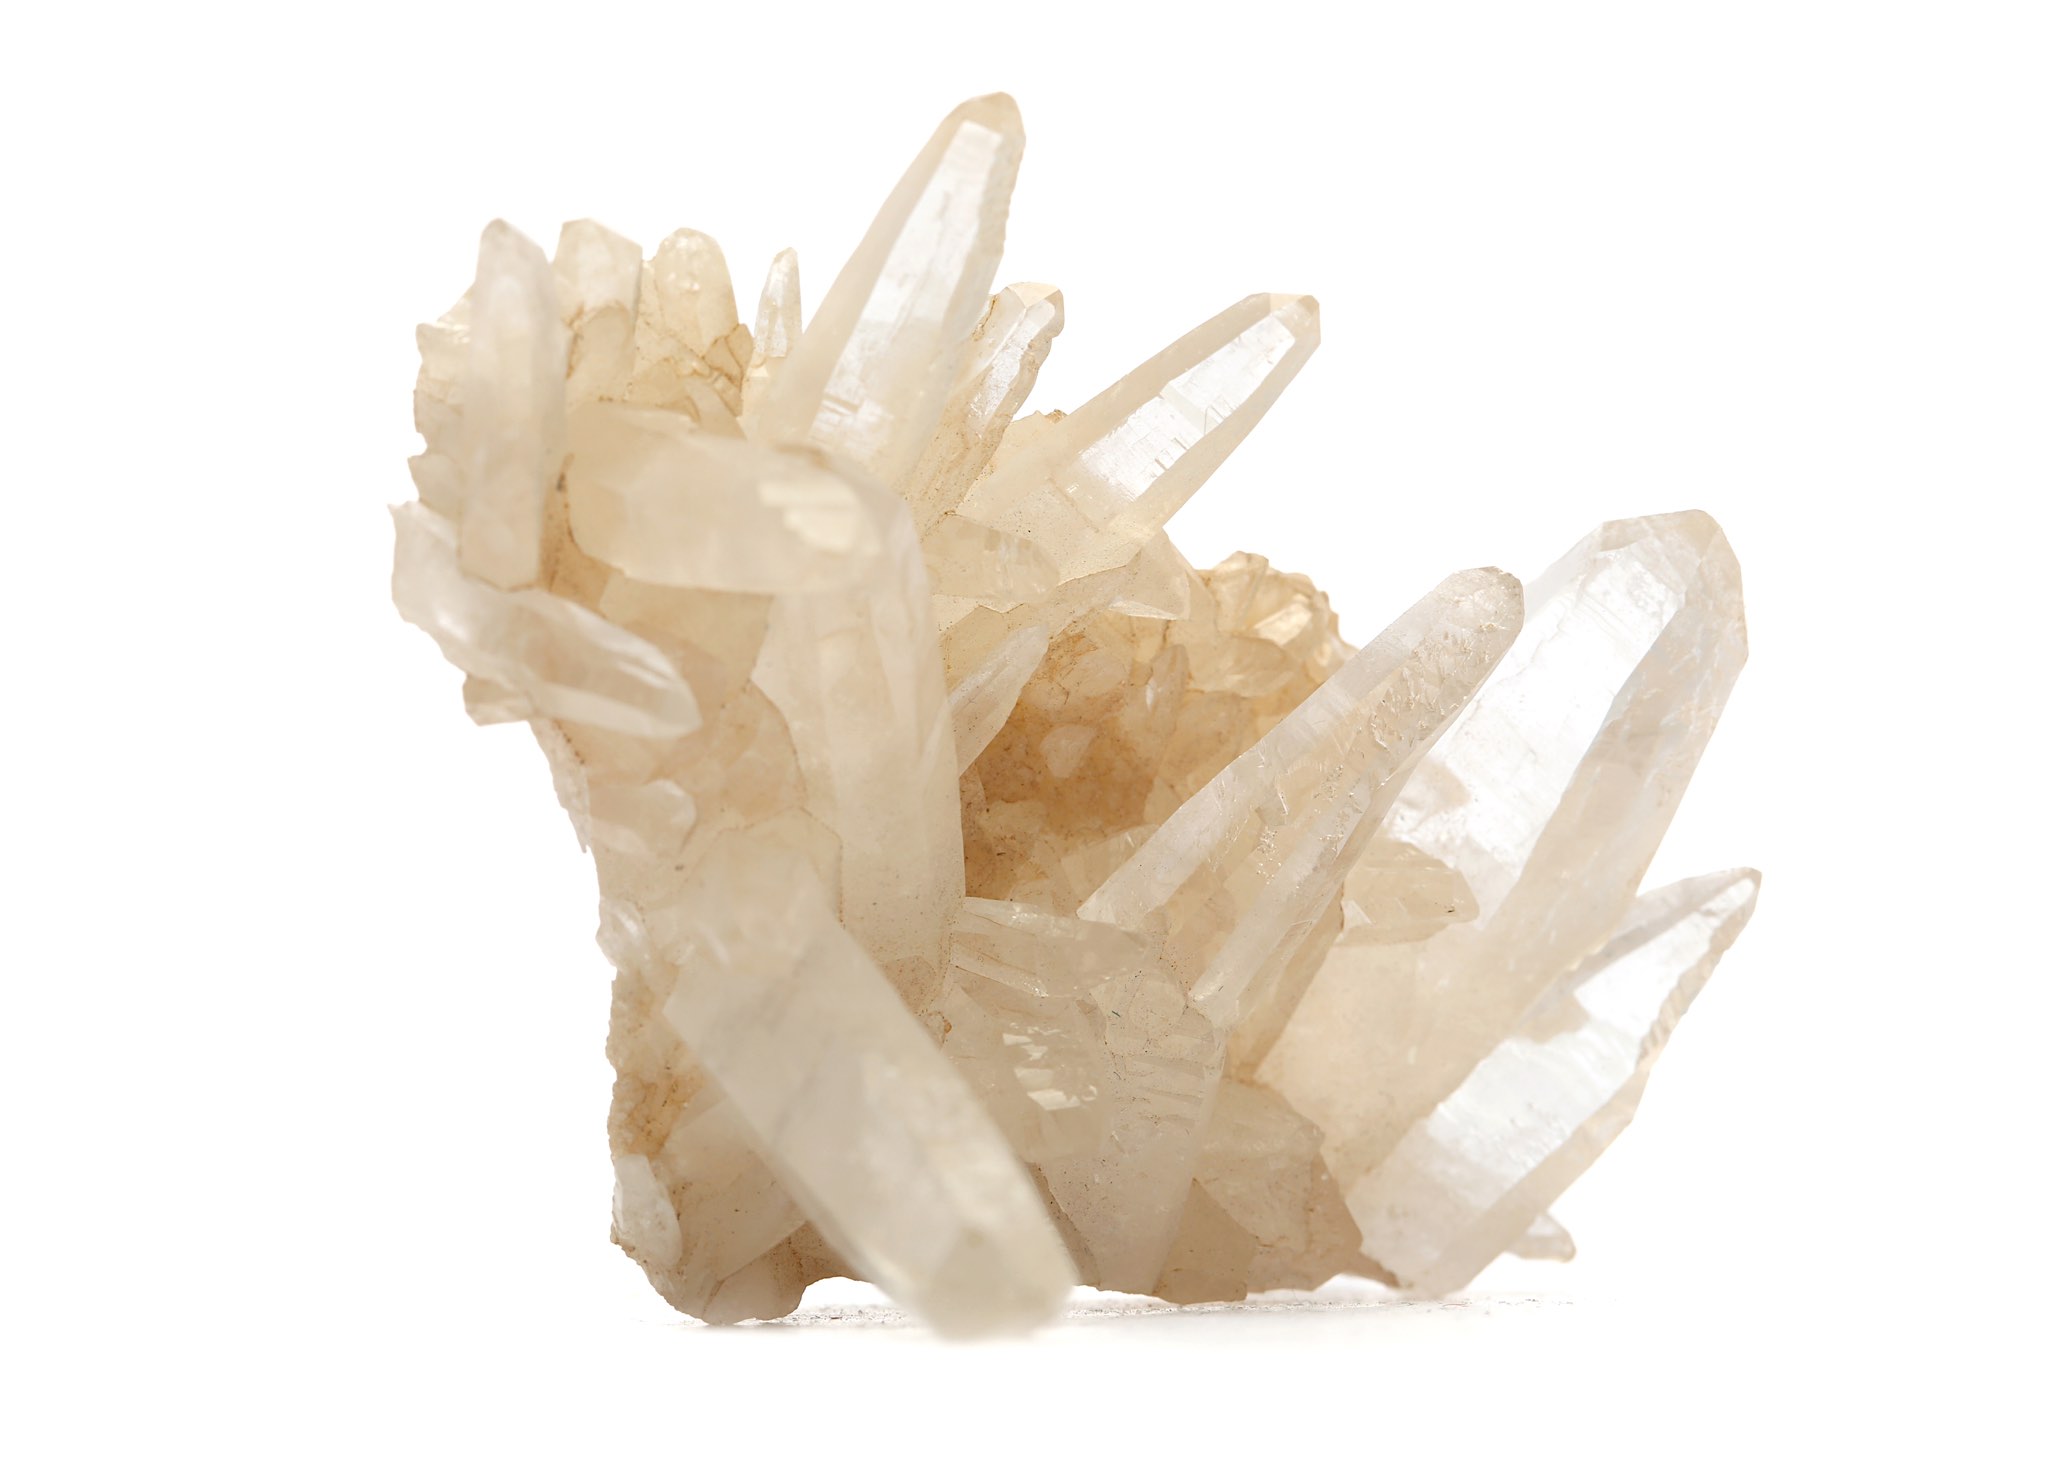 A CRYSTAL FORMATION 8.7 wide, 5cm high.